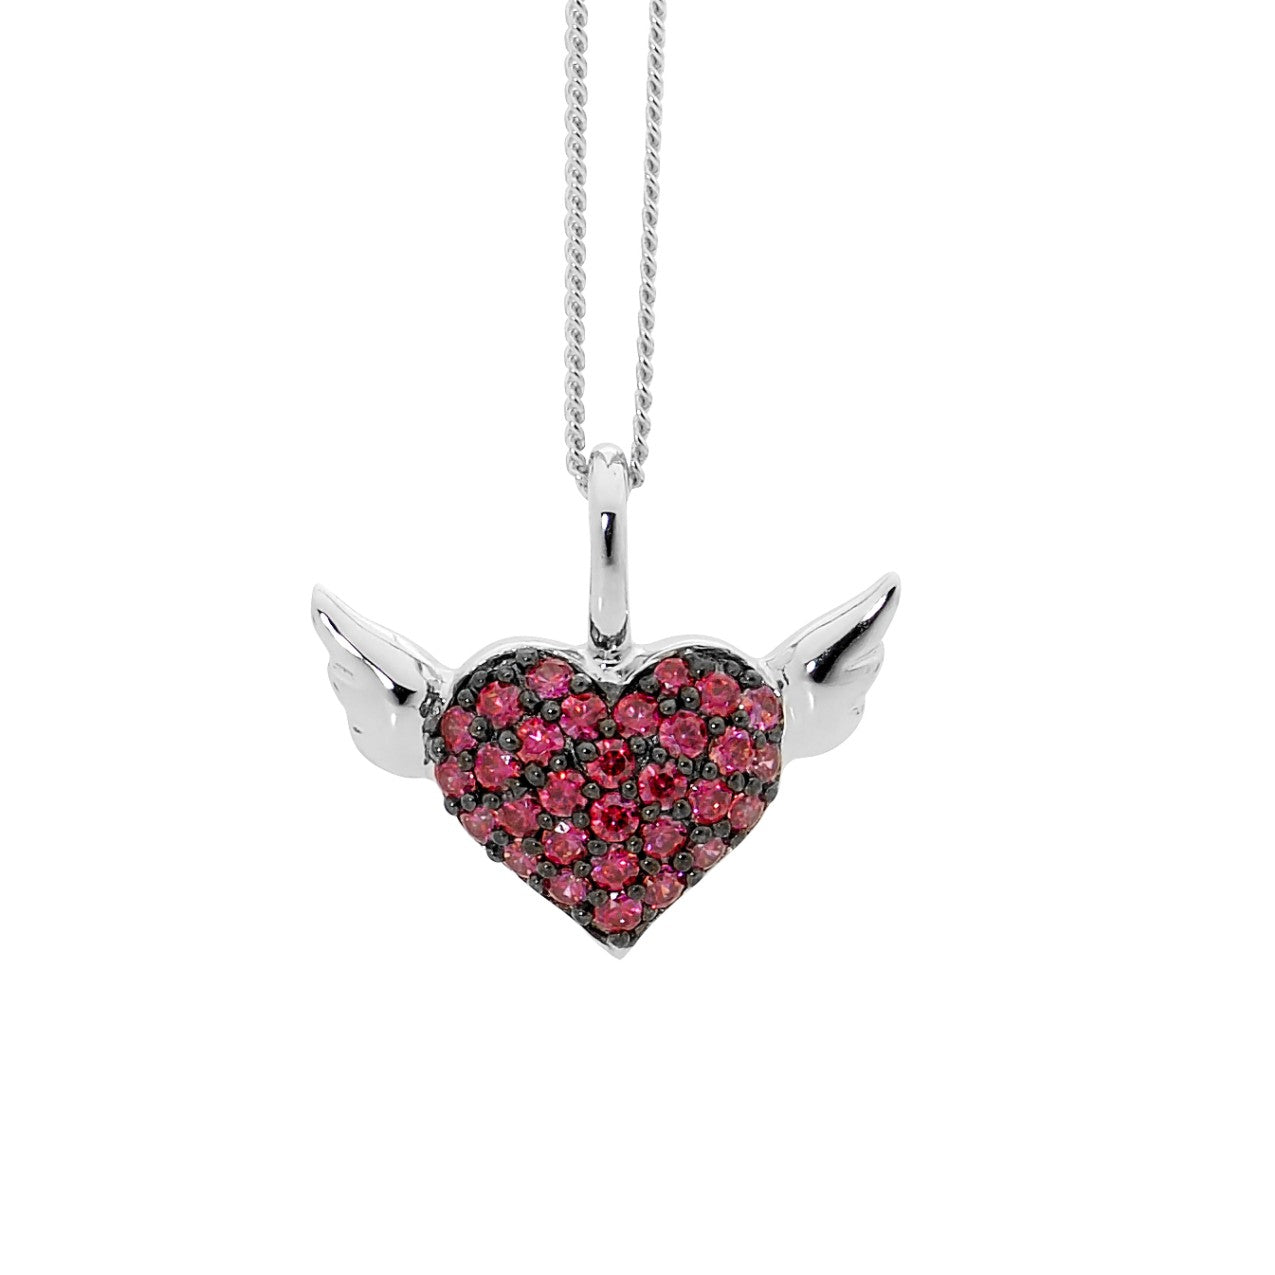 STERLING SILVER WINGED HEART PENDANT